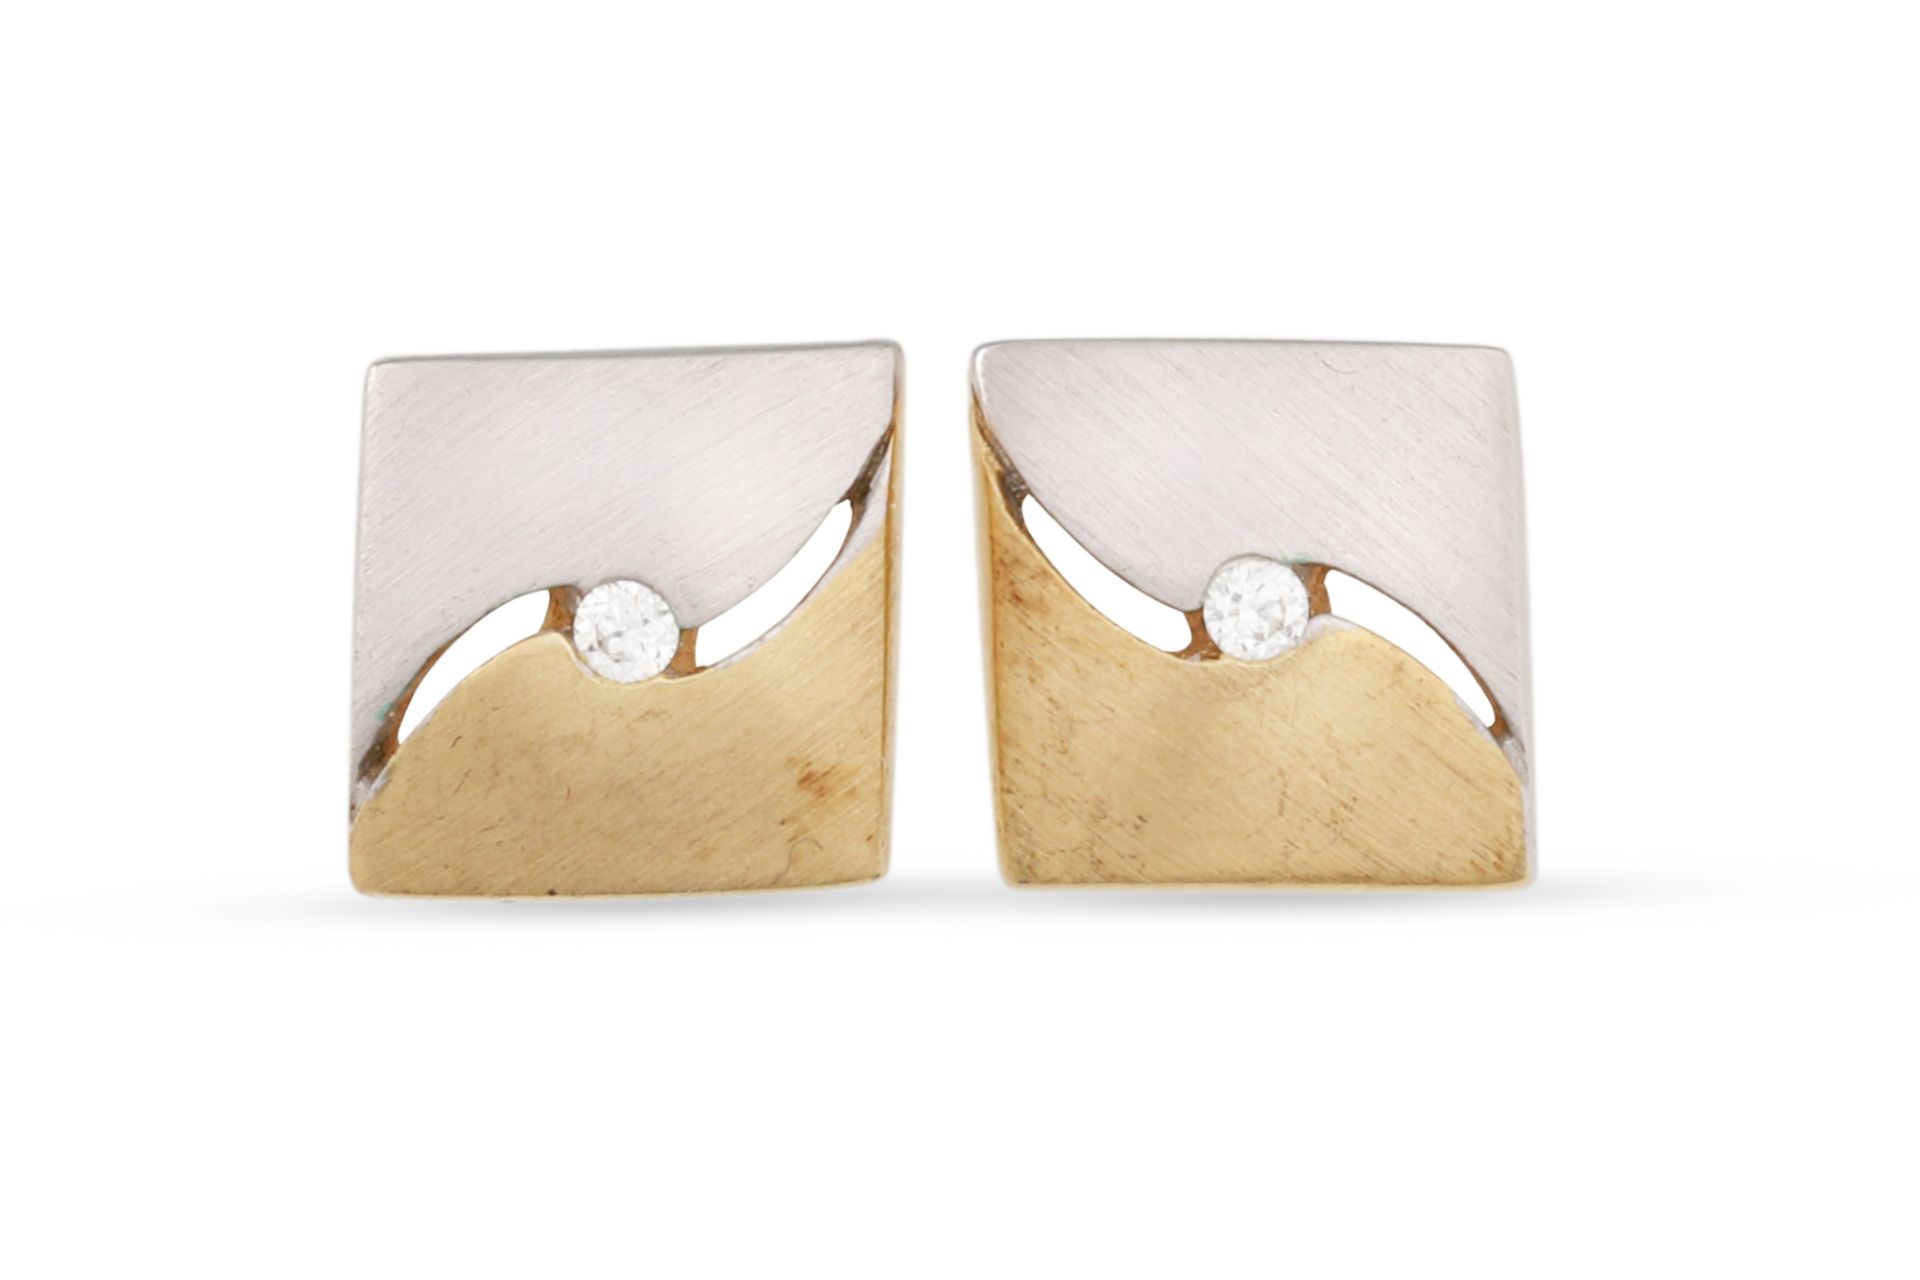 A PAIR OF DIAMOND STUD EARRINGS, mounted in 9ct two tone colour gold, 1.8 g. each